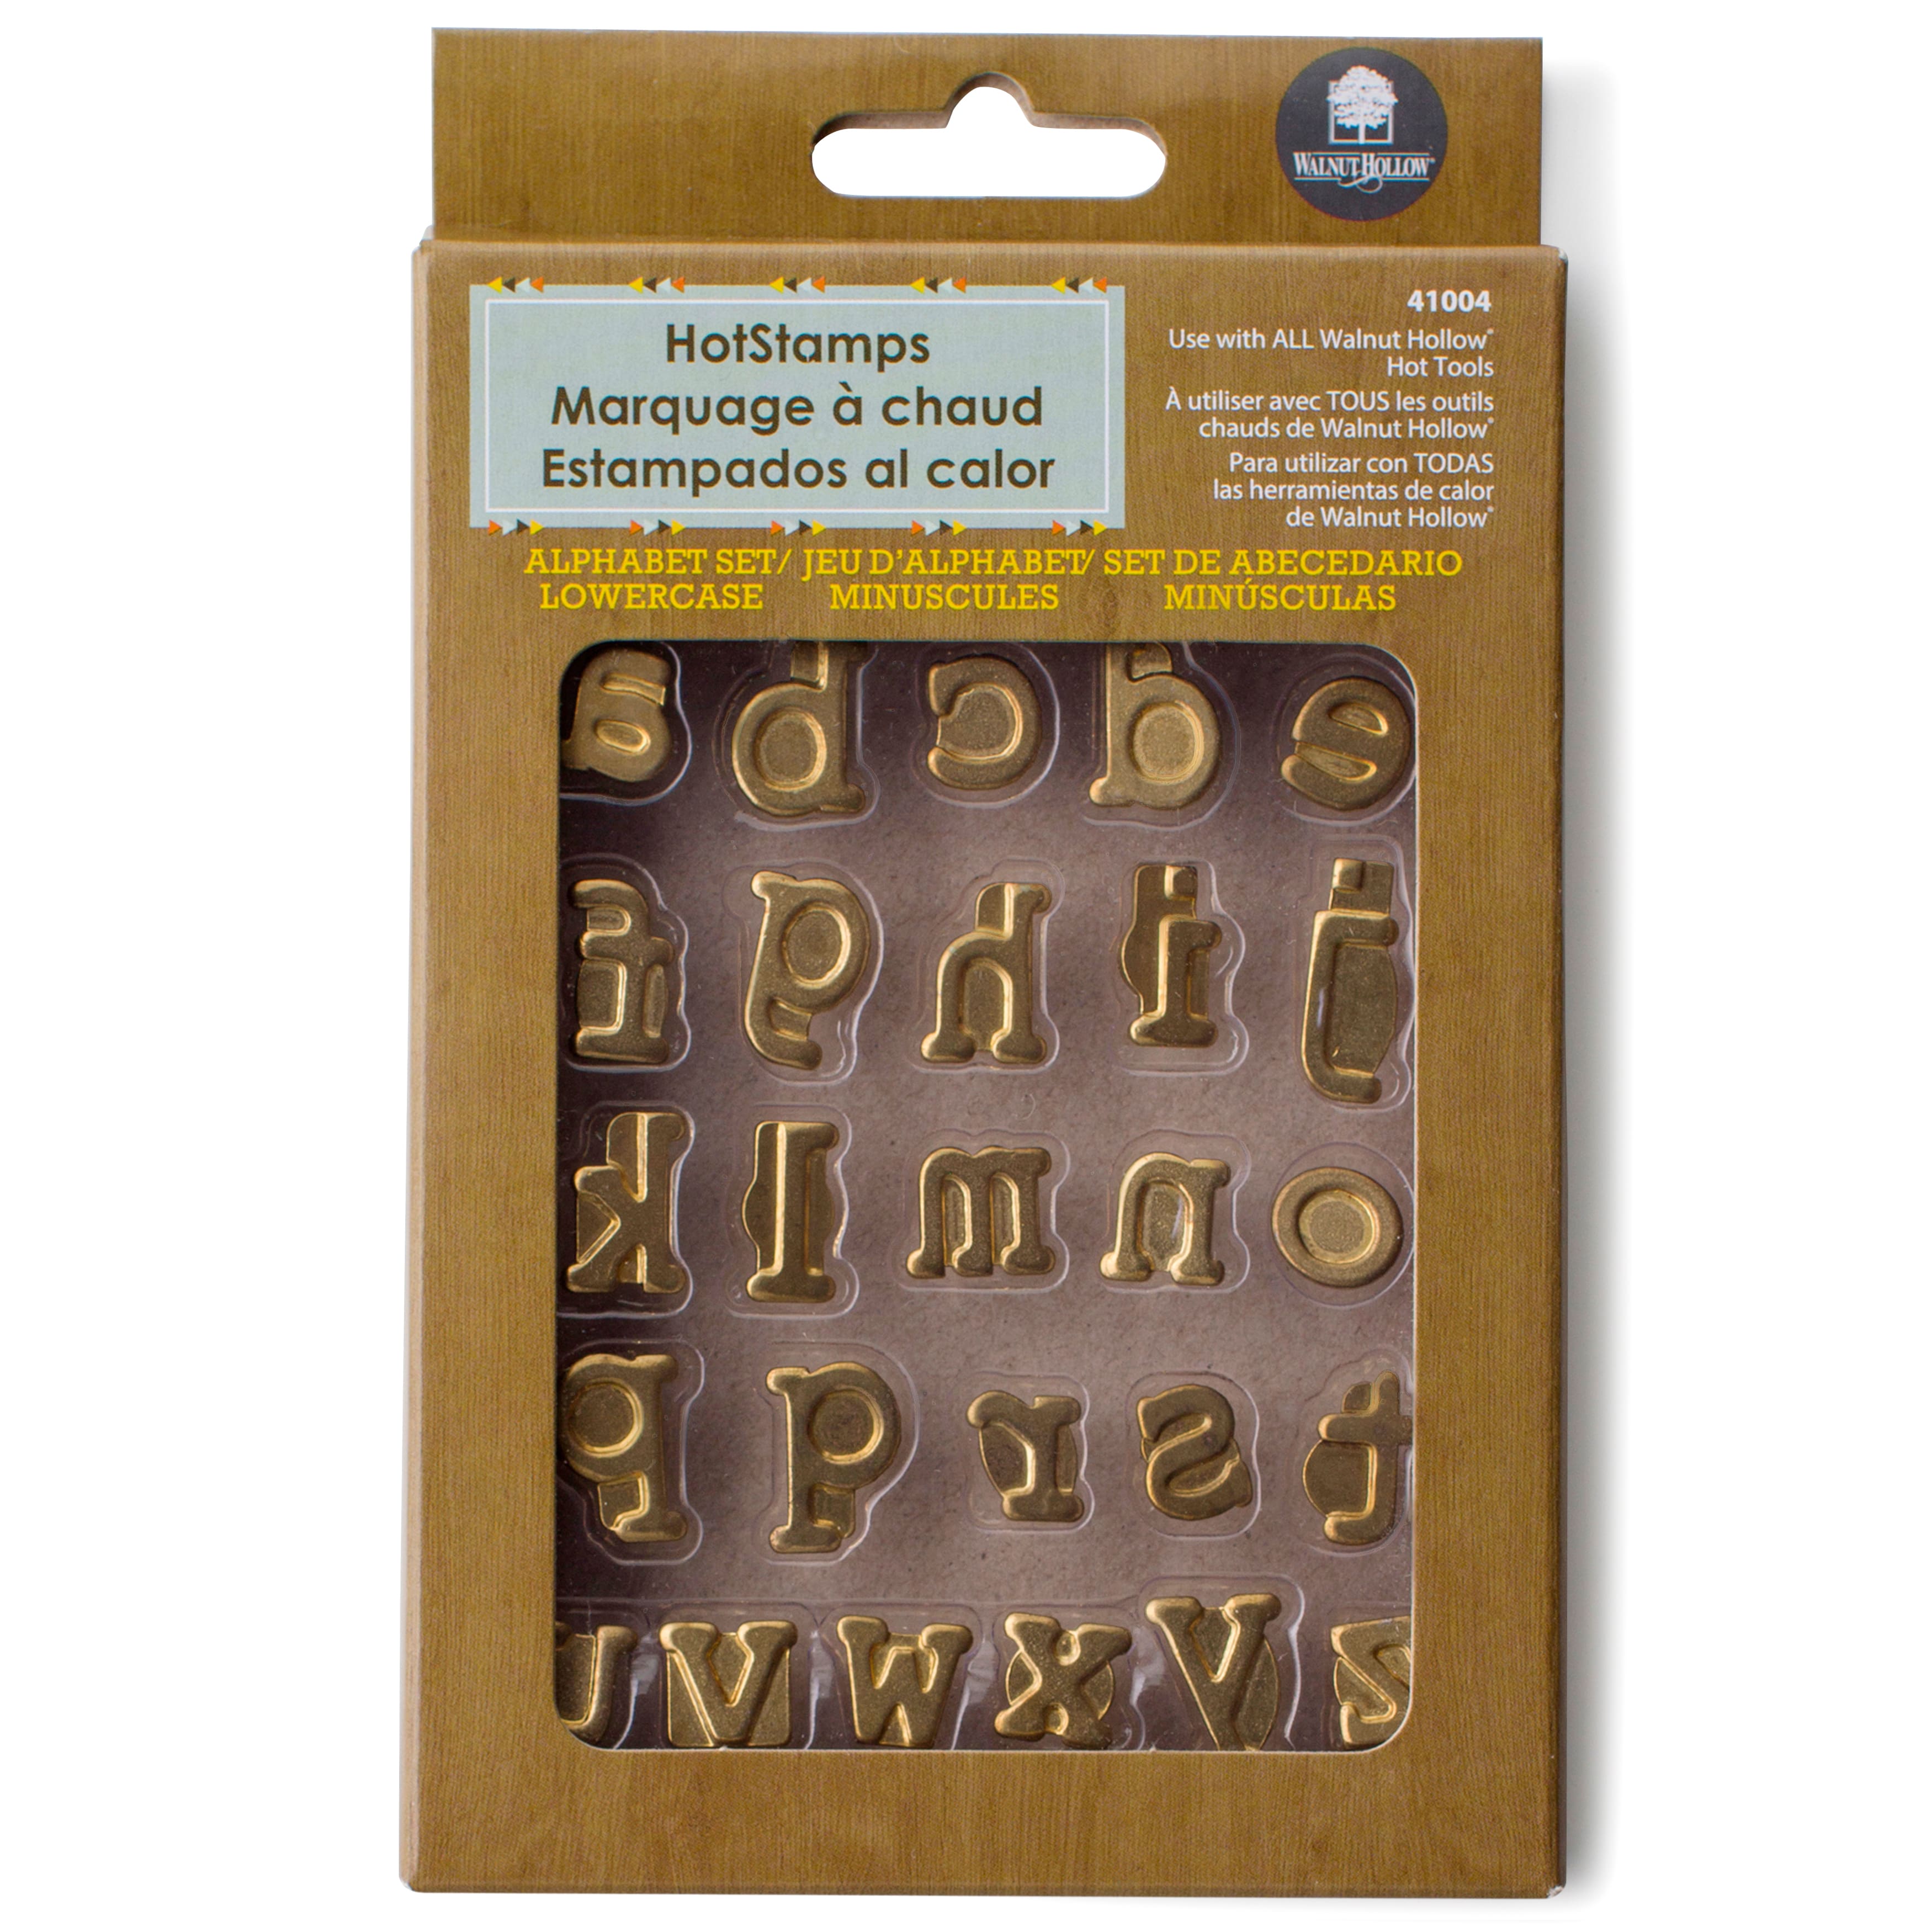 Walnut Hollow Hotstamps Alphabet Set Lowercase 41004 B54 for